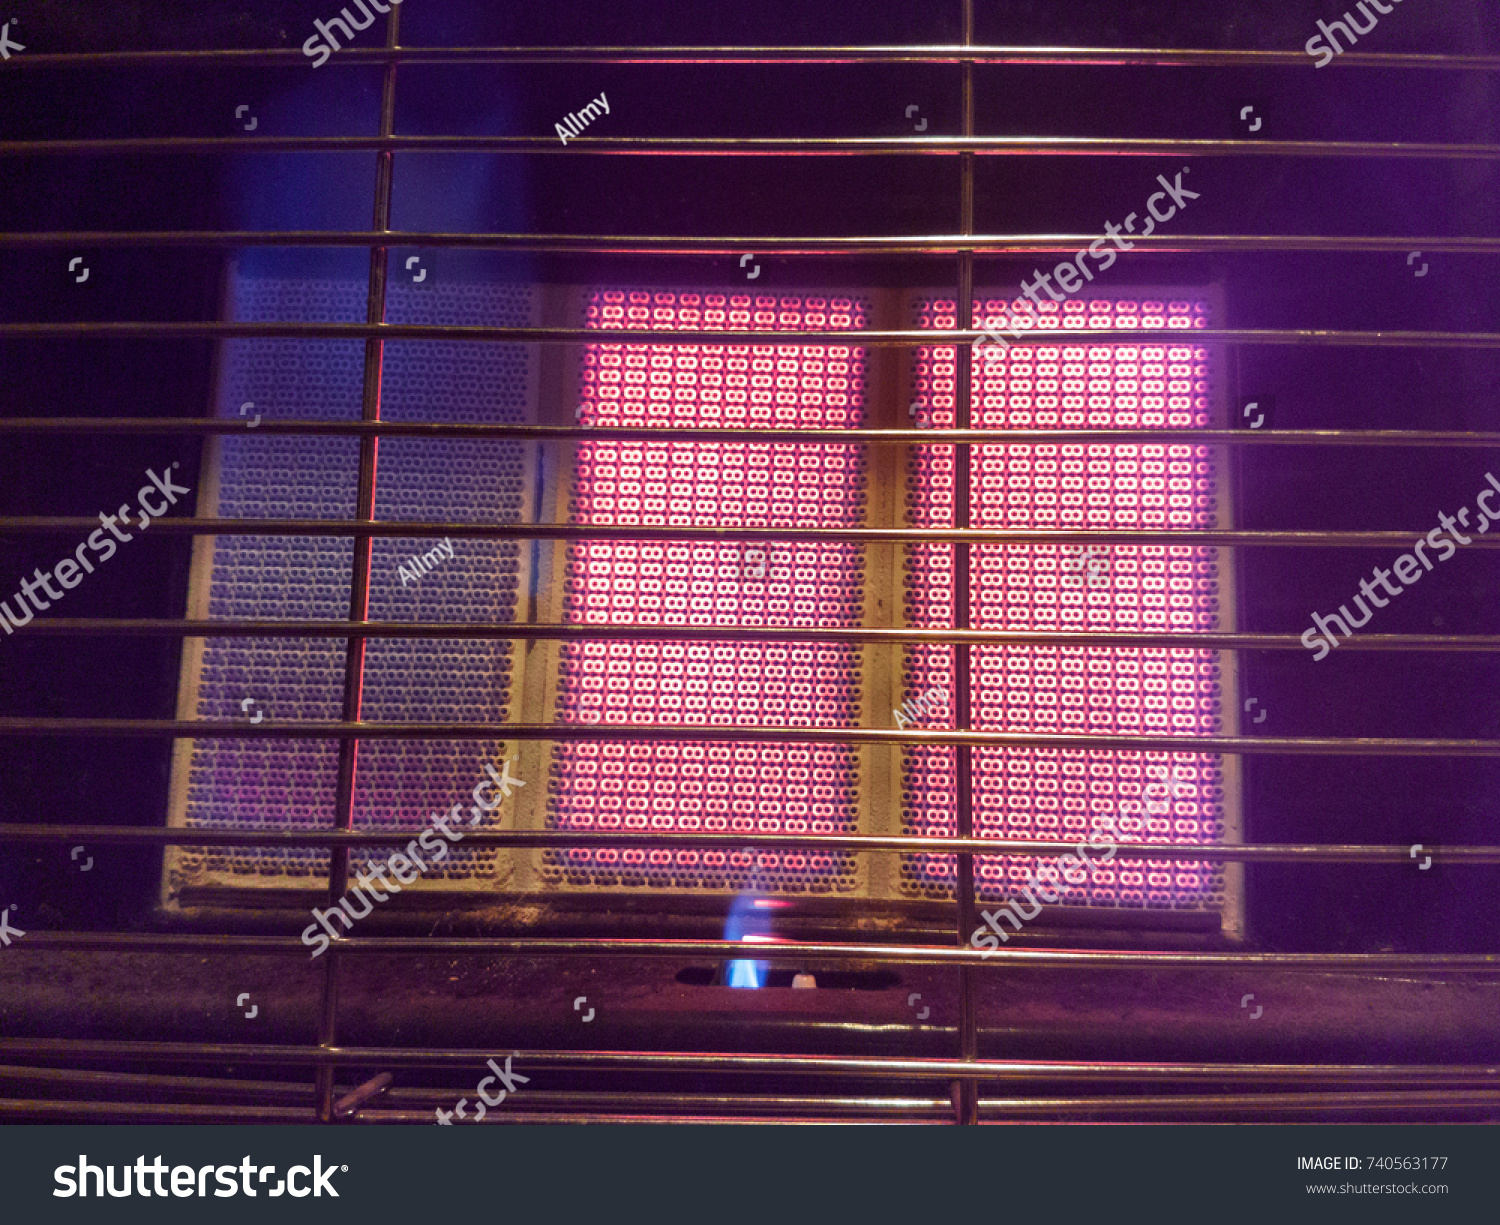 Pilot-flame on a portable gas heater #740563177